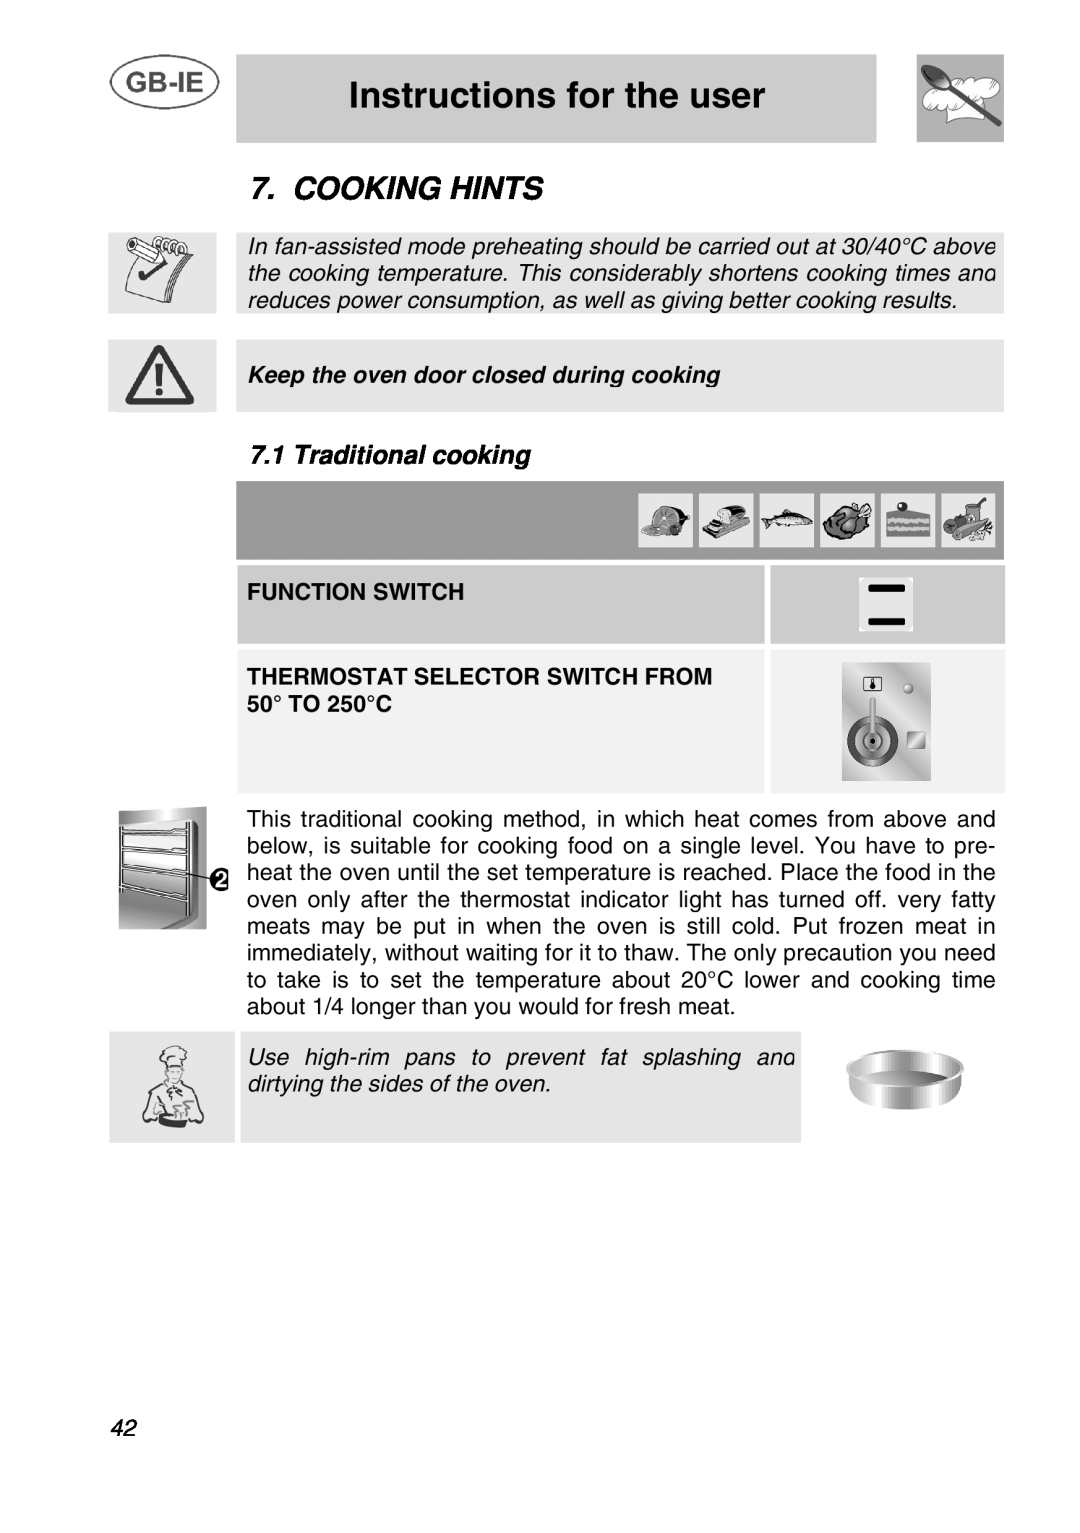 Smeg A1C manual Cooking Hints, Traditional cooking, Instructions for the user, Keep the oven door closed during cooking 